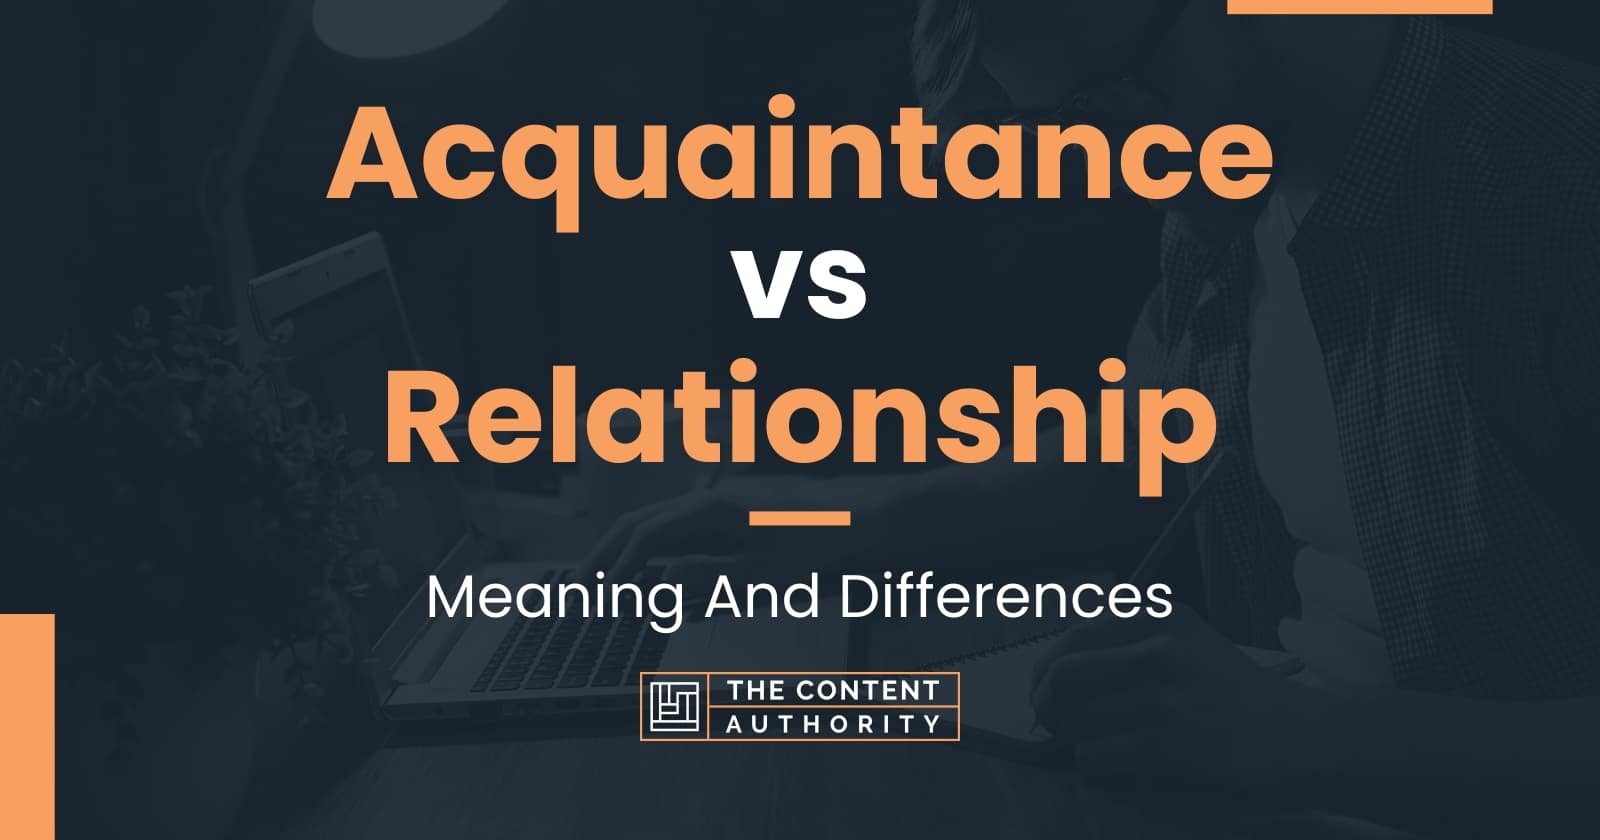 Acquaintance vs Relationship: Meaning And Differences